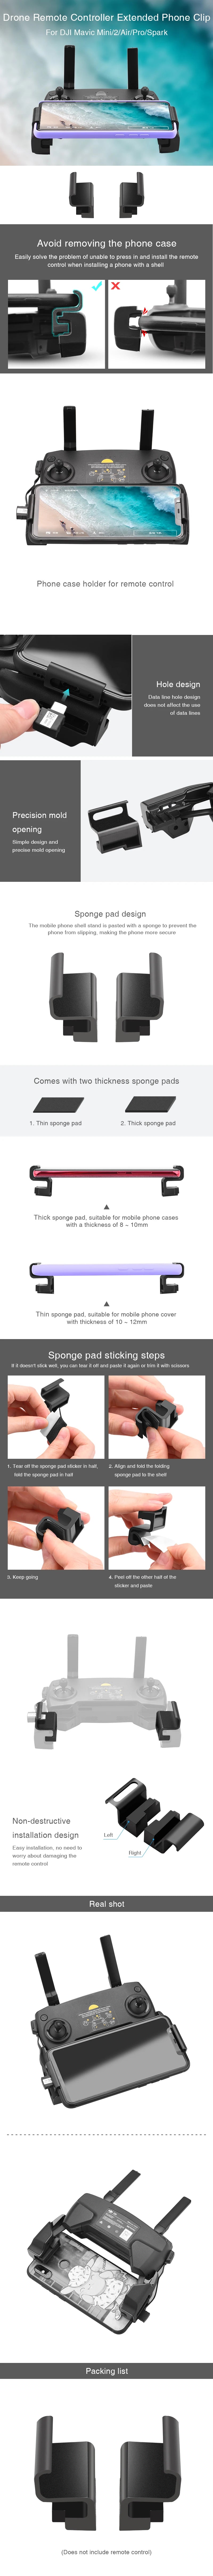 Portable Cellphone Holder, 'a sponge to prevent the emote control shoi Packing list